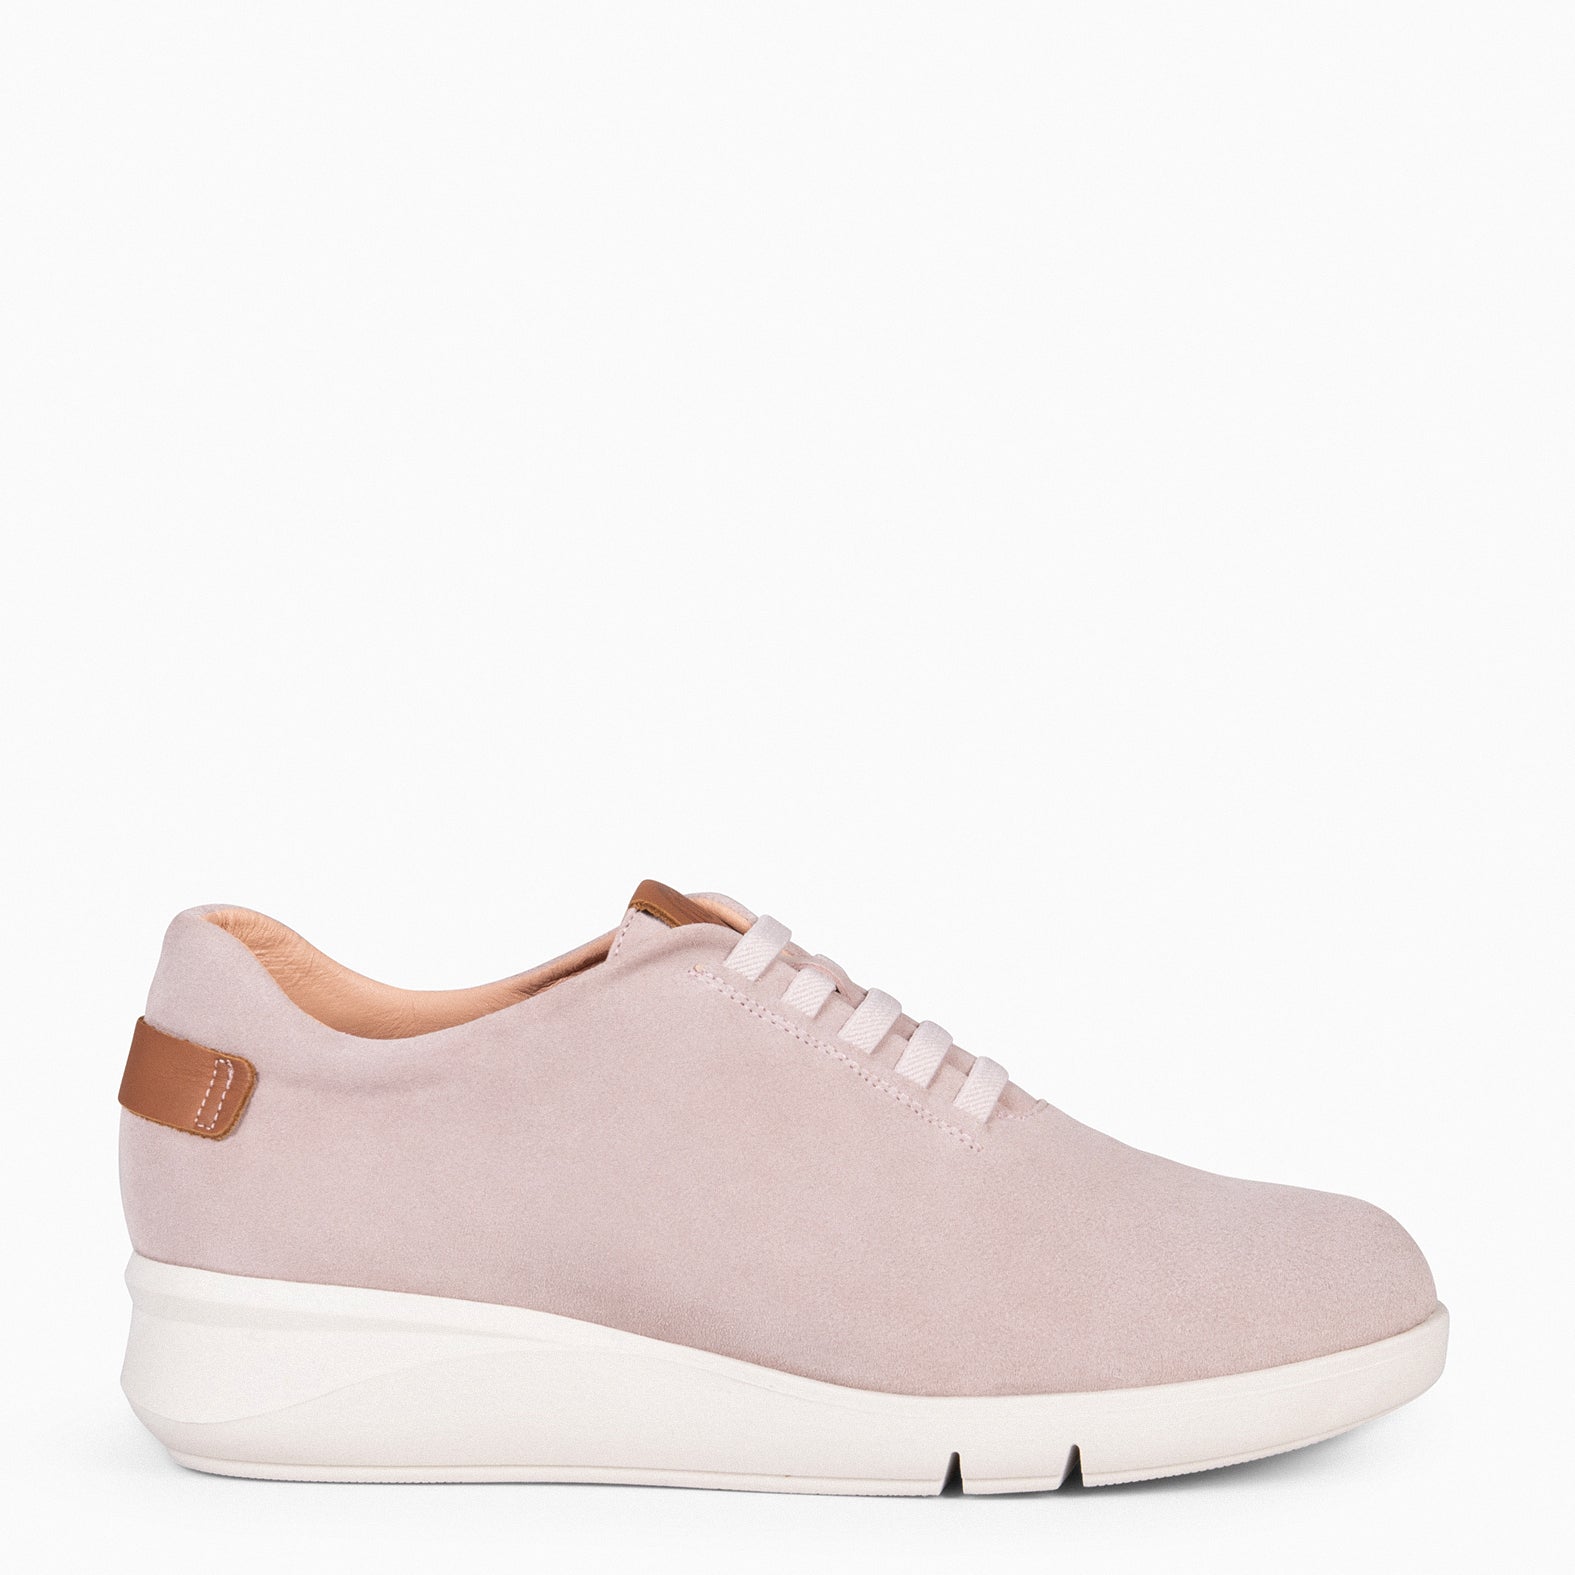 FLY – NUDE casual sneaker with elastic laces